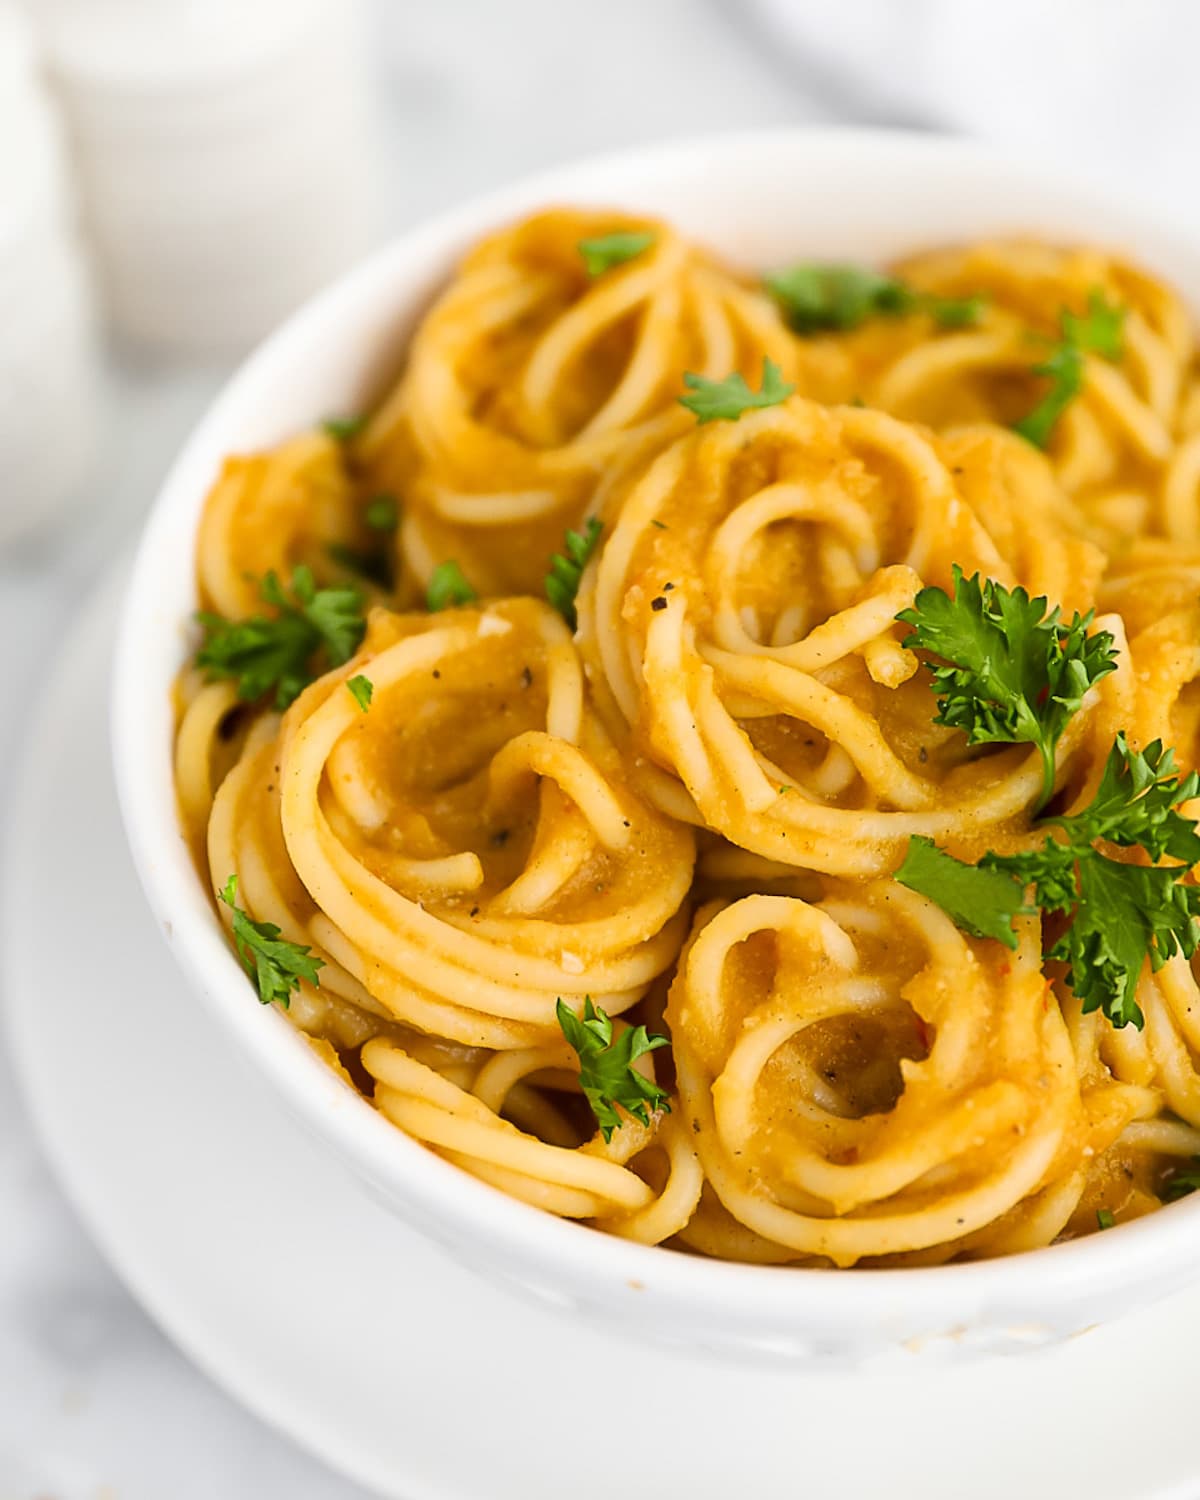 A close up shot of creamy squash sauce and spaghetti noodles